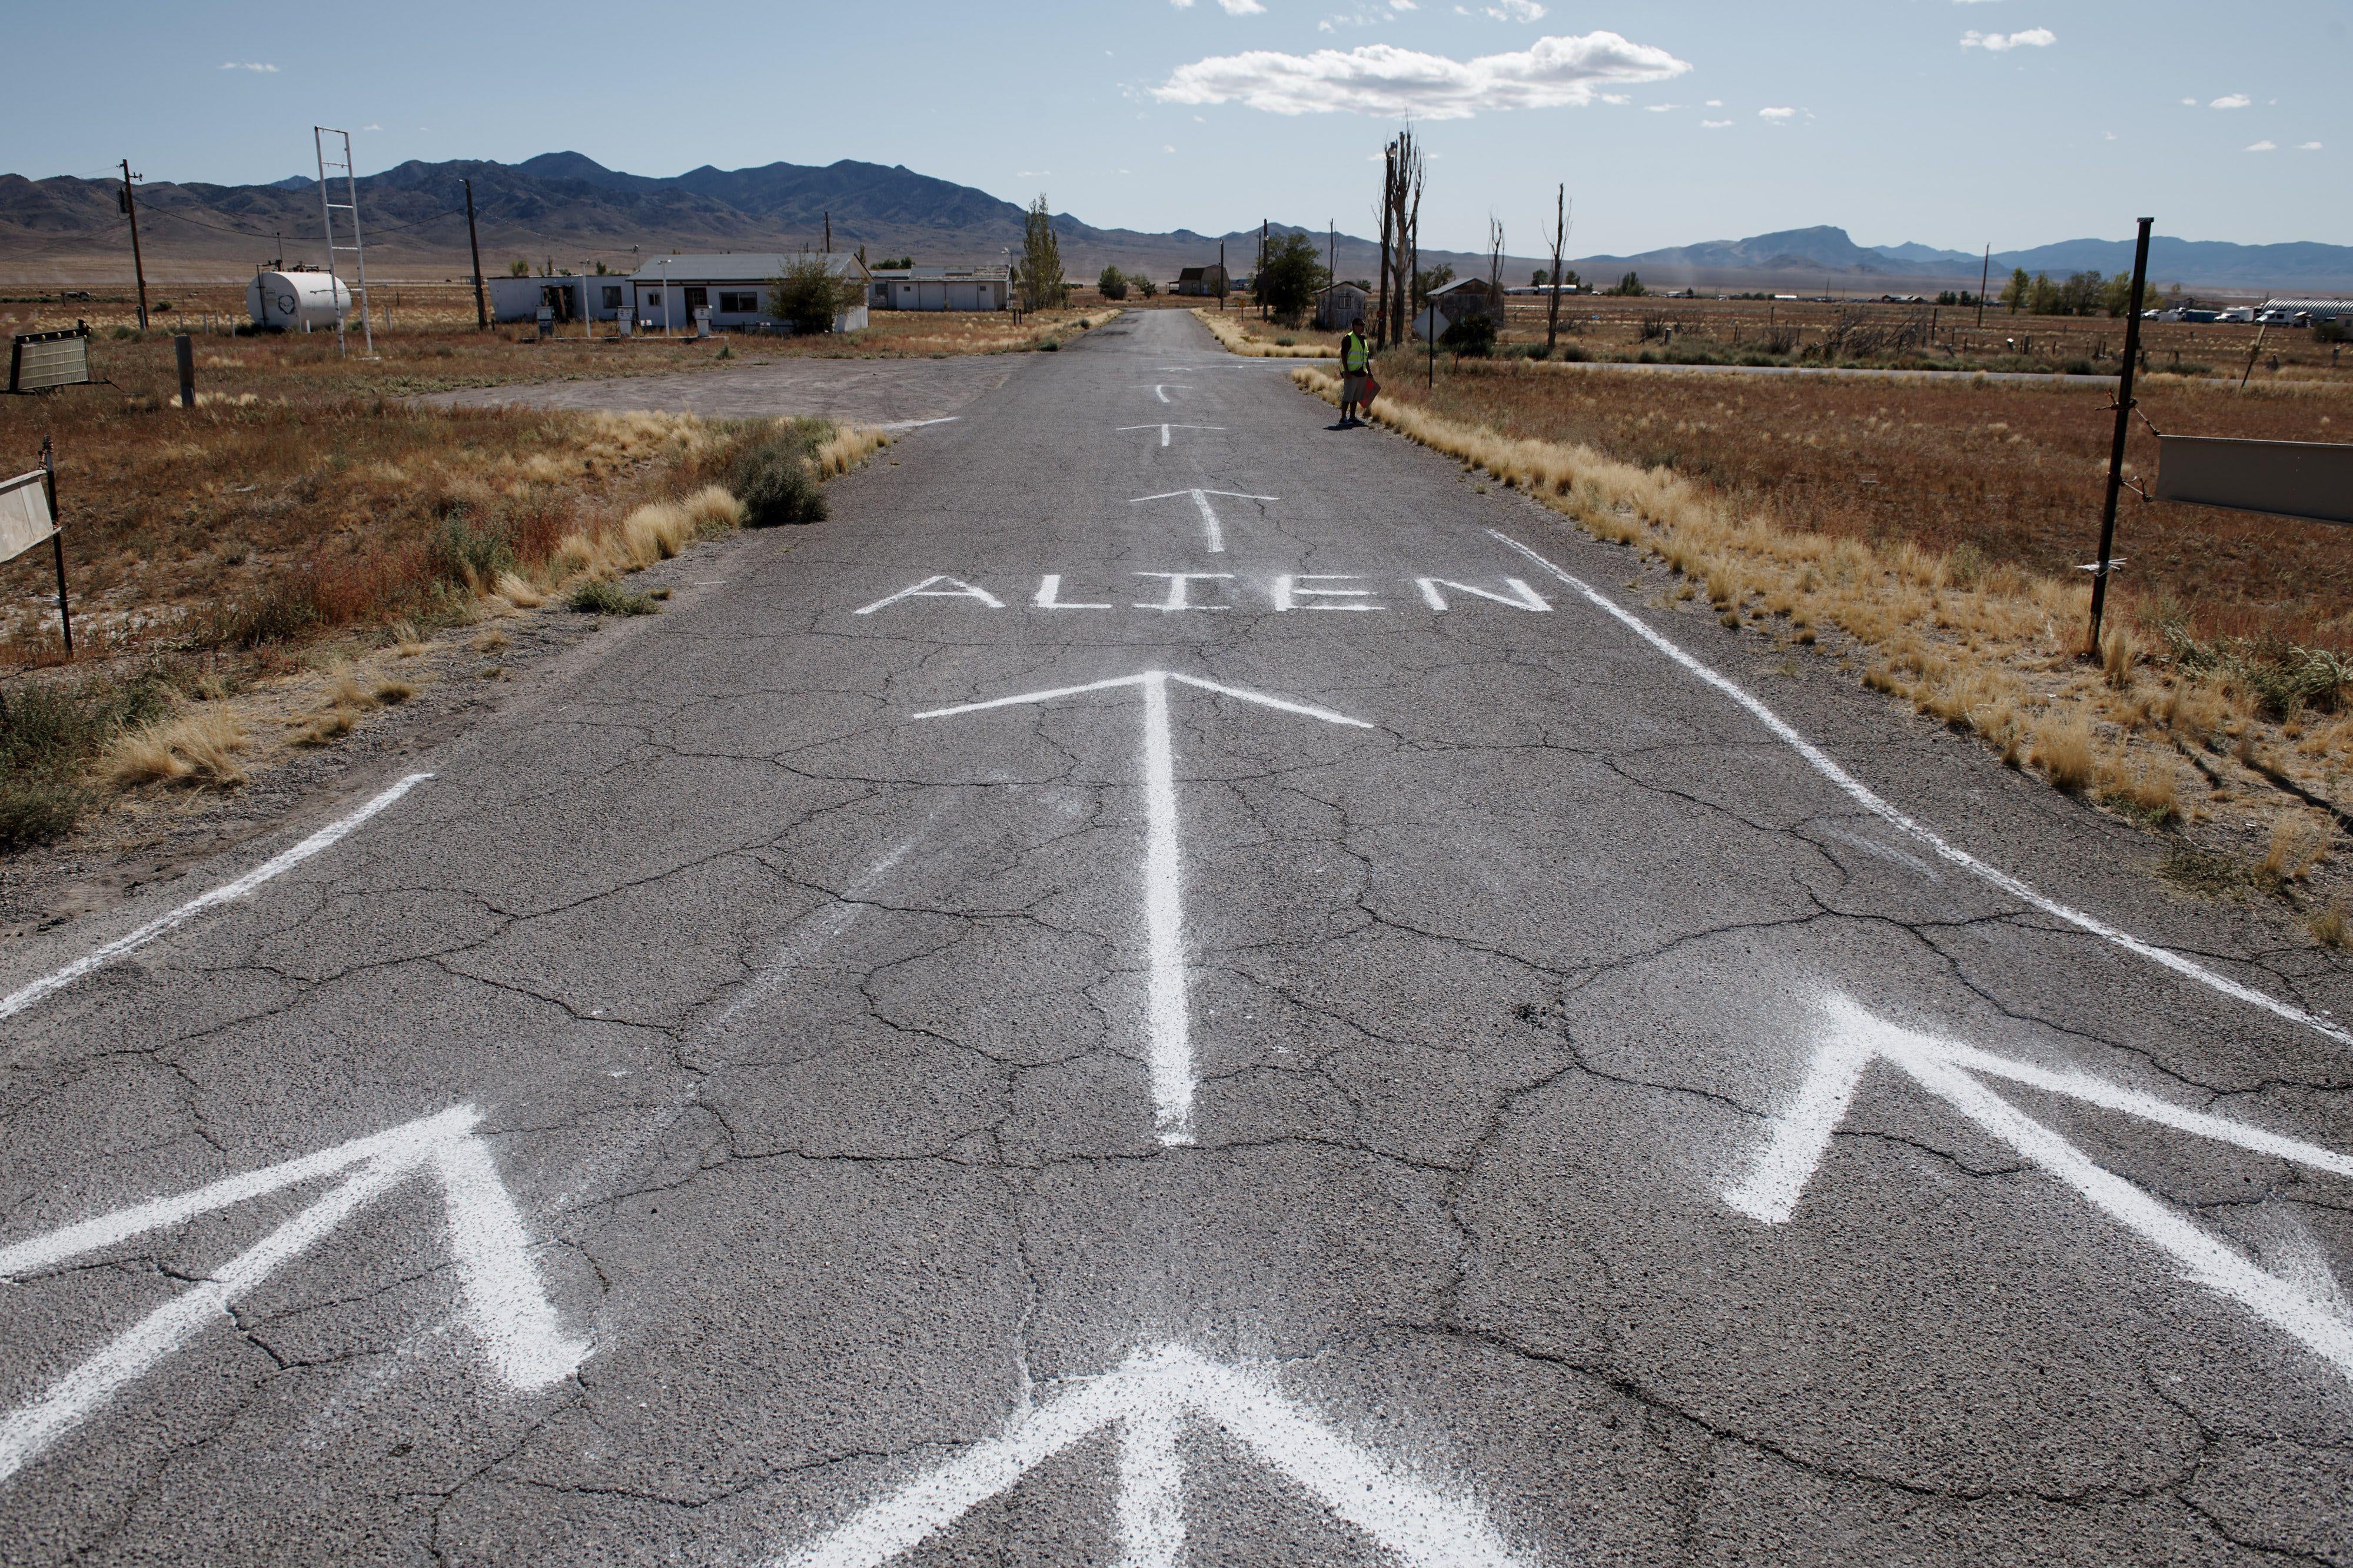 TOPSHOT - The entrance to Alienstock festival is marked on the road in Rachel, Nevada on September 20, 2019. - A joke Facebook event named "Storm Area 51, They Can't Stop All of Us," was created in June 2019. As of September 13, more than 2 million people had signed up for the event and a 1.5 million more had marked themselves as "interested." Multiple alien related events are now set to take place over the weekend of September 20, 2019 along state Route 375 also known as the "Extraterrestrial Highway." (Photo by Bridget BENNETT / AFP) (Photo by BRIDGET BENNETT/AFP via Getty Images)